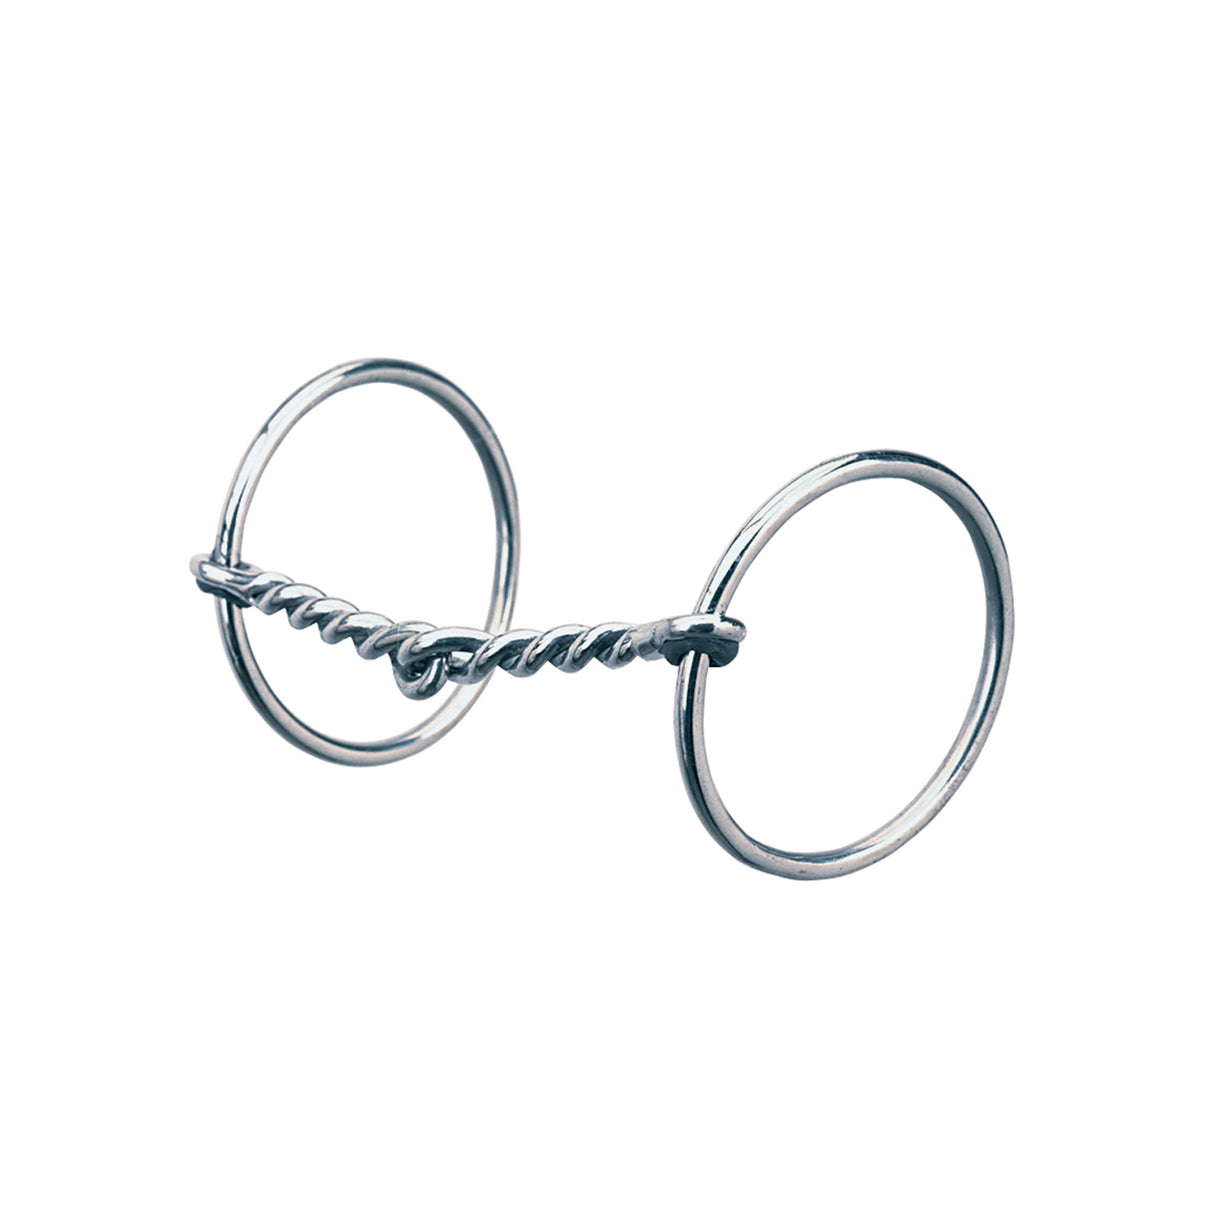 All Purpose Ring Snaffle Bit, 5" Single Twisted Wire Mouth